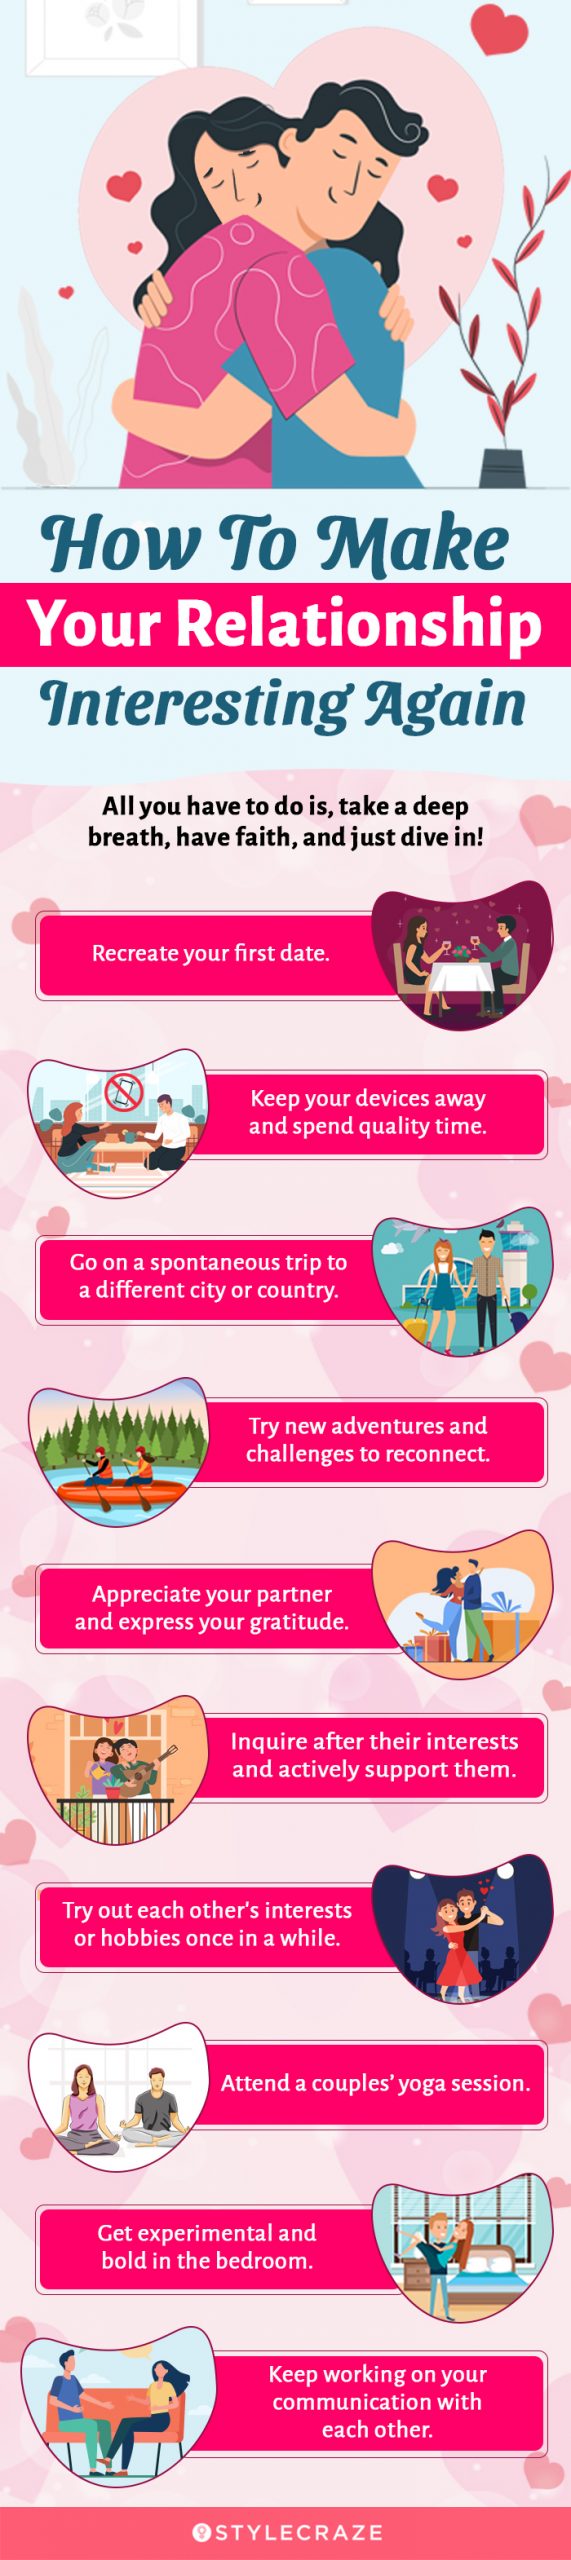 how to make your relationship interesting again (infographic)